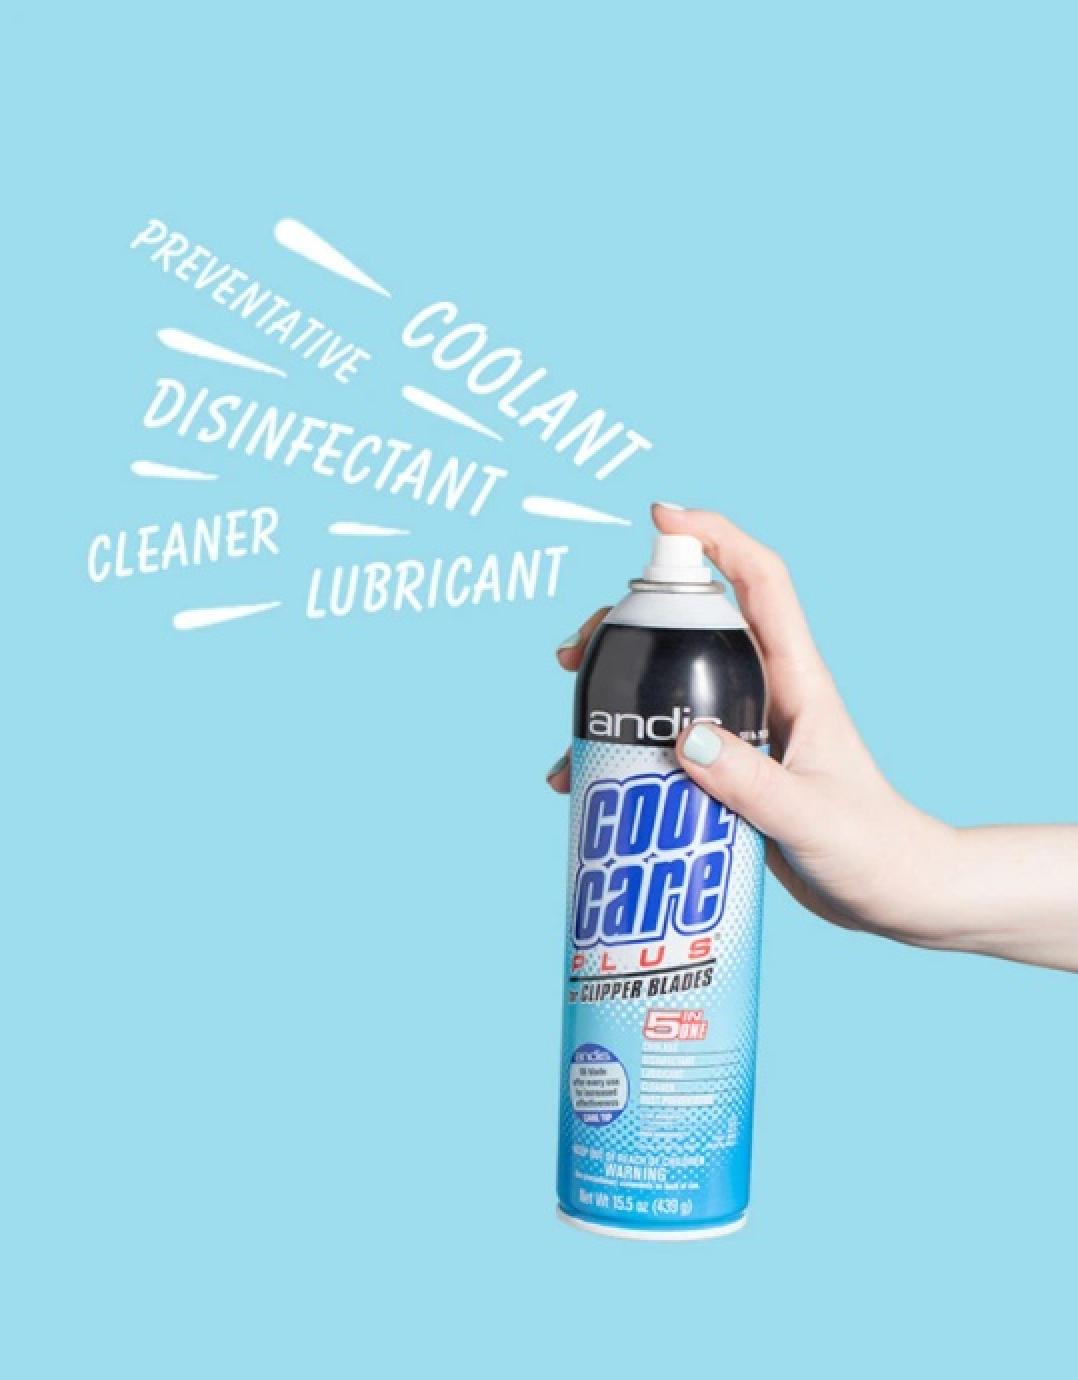 Andis Cool Care Plus Clipper Blade Cleaner Info